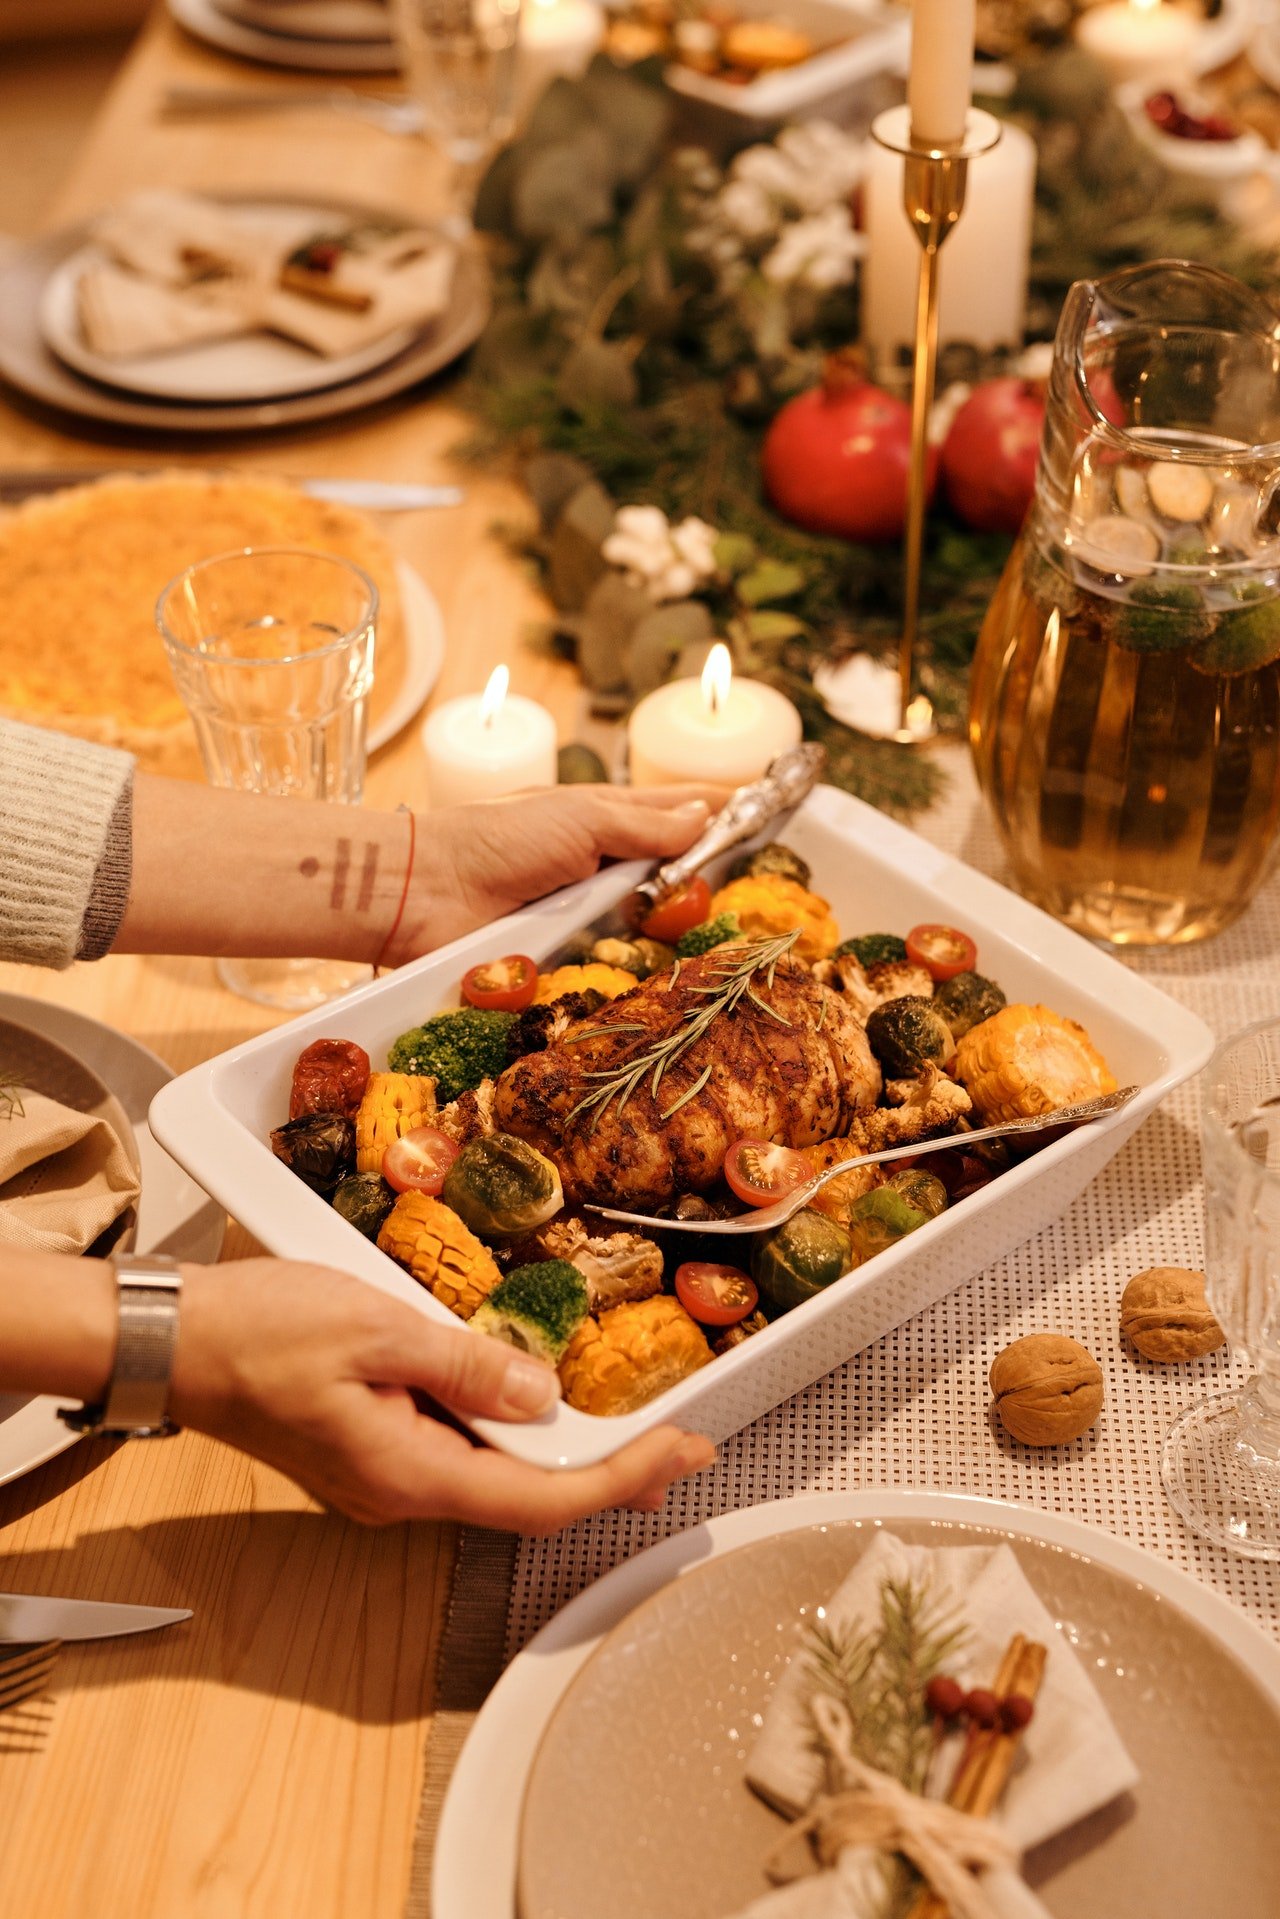 Zoe offered him some turkey, and Brandon decided it was time to reveal everything. | Source: Pexels